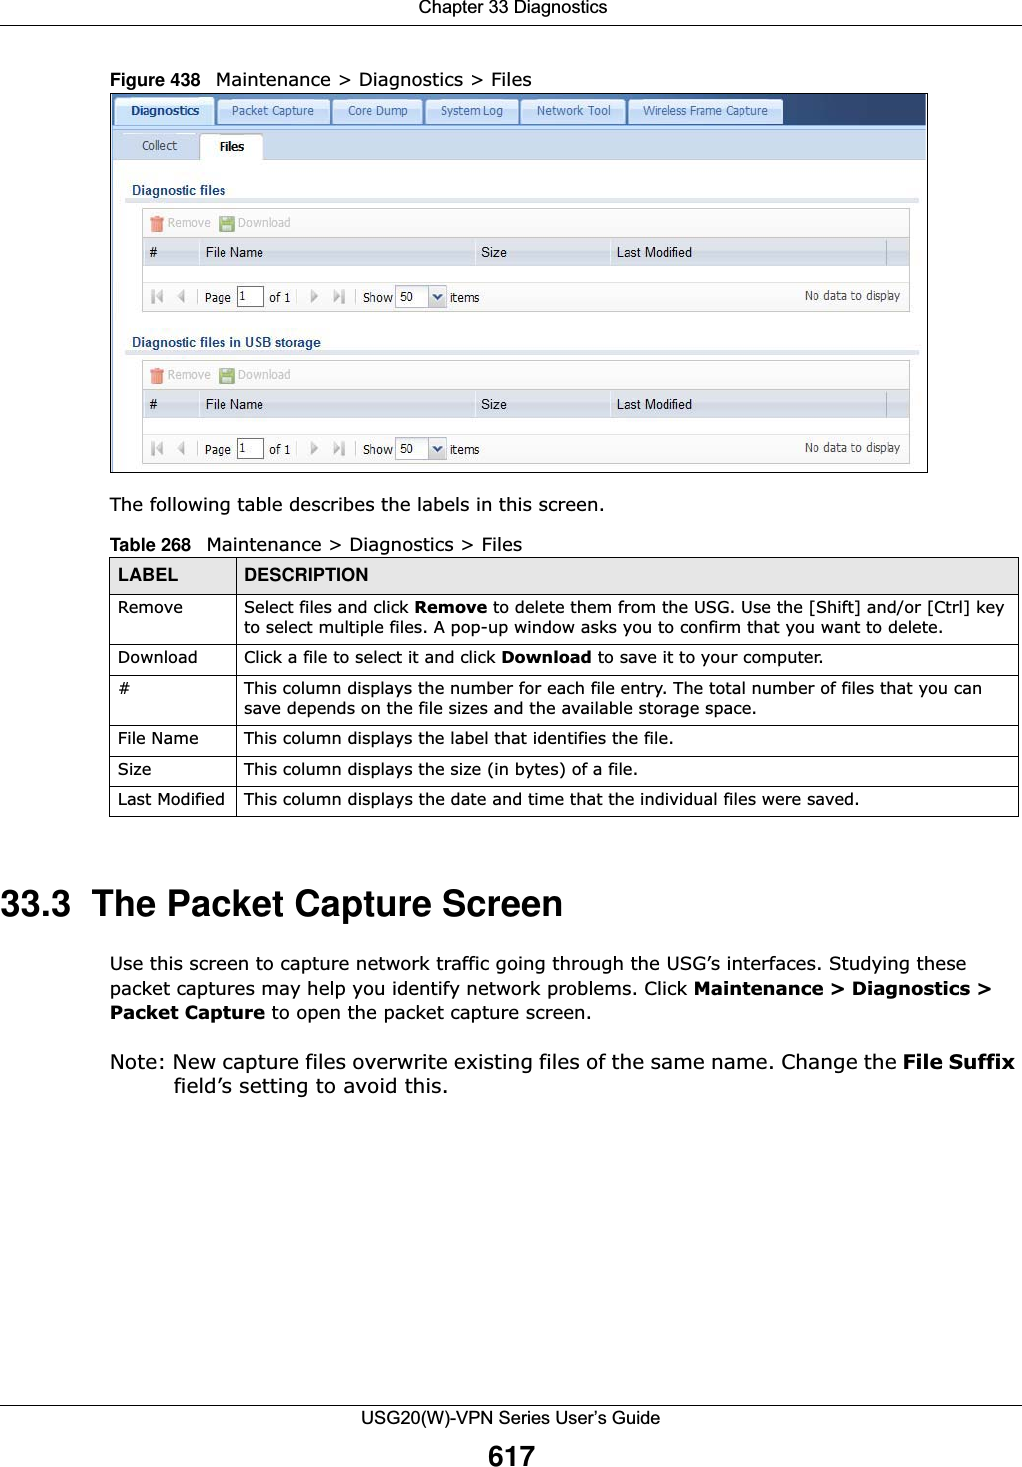  Chapter 33 DiagnosticsUSG20(W)-VPN Series User’s Guide617Figure 438   Maintenance &gt; Diagnostics &gt; Files The following table describes the labels in this screen.  33.3  The Packet Capture ScreenUse this screen to capture network traffic going through the USG’s interfaces. Studying these packet captures may help you identify network problems. Click Maintenance &gt; Diagnostics &gt; Packet Capture to open the packet capture screen.Note: New capture files overwrite existing files of the same name. Change the File Suffix field’s setting to avoid this.Table 268   Maintenance &gt; Diagnostics &gt; FilesLABEL DESCRIPTIONRemove Select files and click Remove to delete them from the USG. Use the [Shift] and/or [Ctrl] key to select multiple files. A pop-up window asks you to confirm that you want to delete.Download Click a file to select it and click Download to save it to your computer.#This column displays the number for each file entry. The total number of files that you can save depends on the file sizes and the available storage space.File Name This column displays the label that identifies the file. Size This column displays the size (in bytes) of a file.Last Modified This column displays the date and time that the individual files were saved.